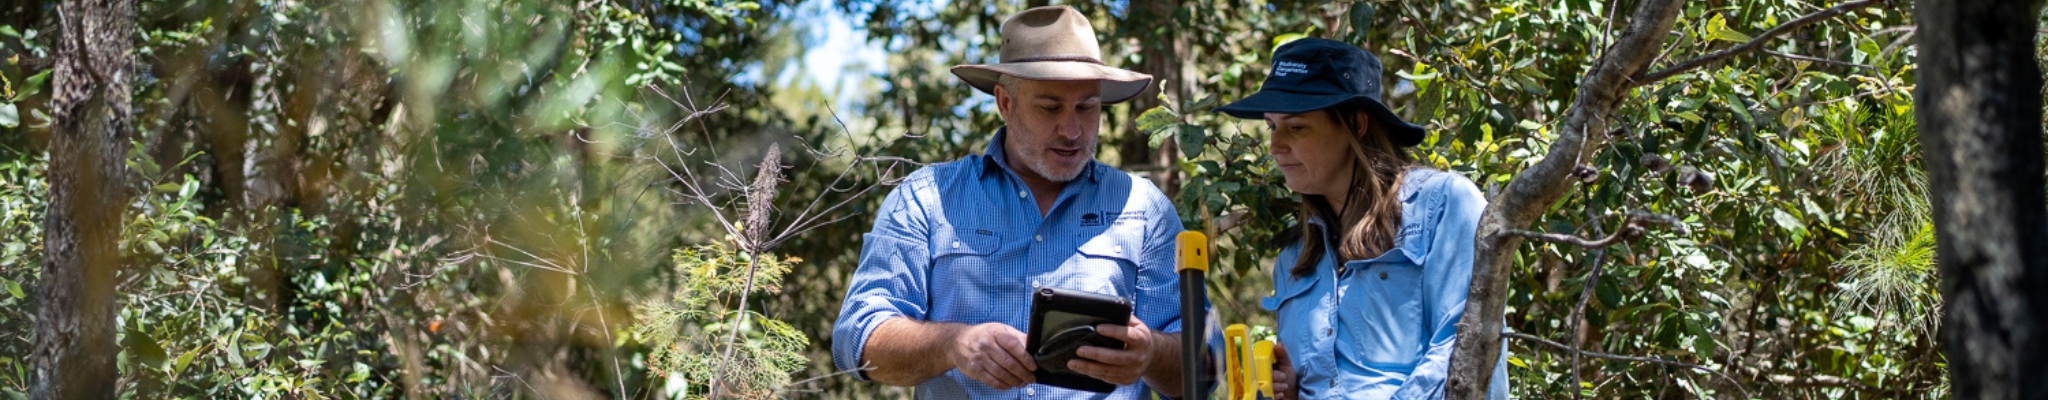 Two uniformed NSW Biodiversity Conservation Trust staff members stand in bushland reviewing a digital tablet used for reporting species on a conservation agreement site 